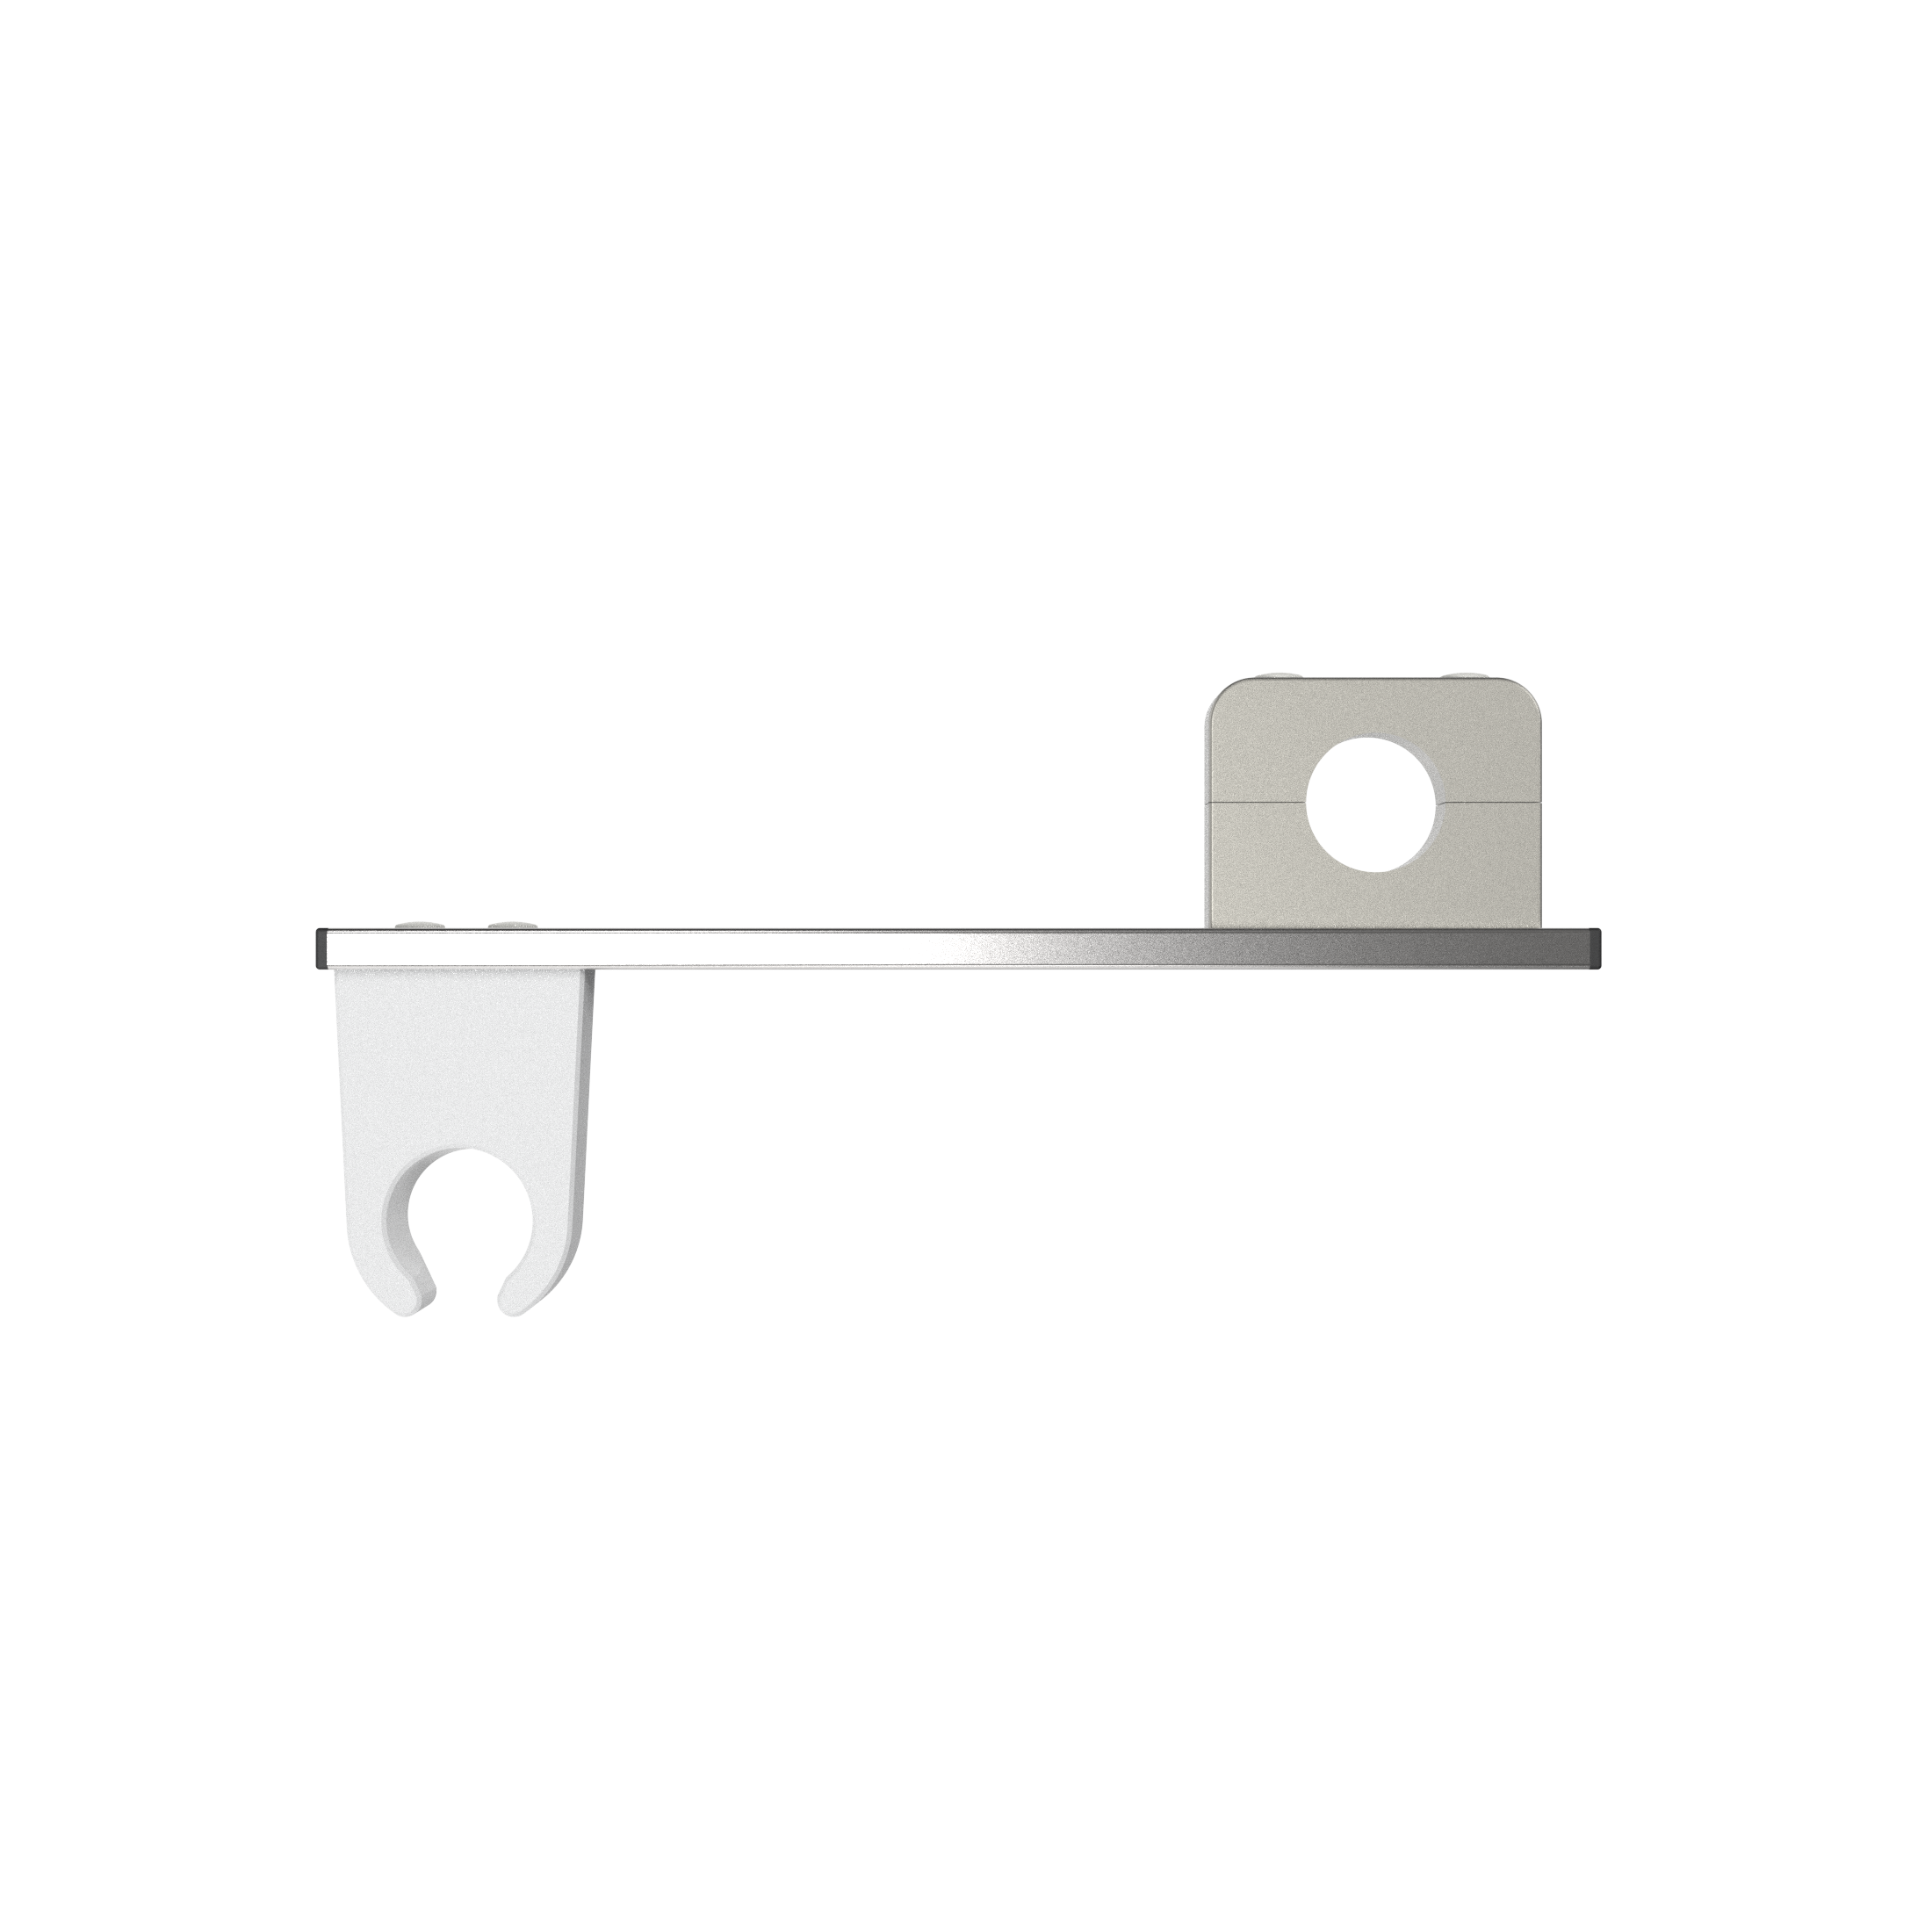 Probe holder with support